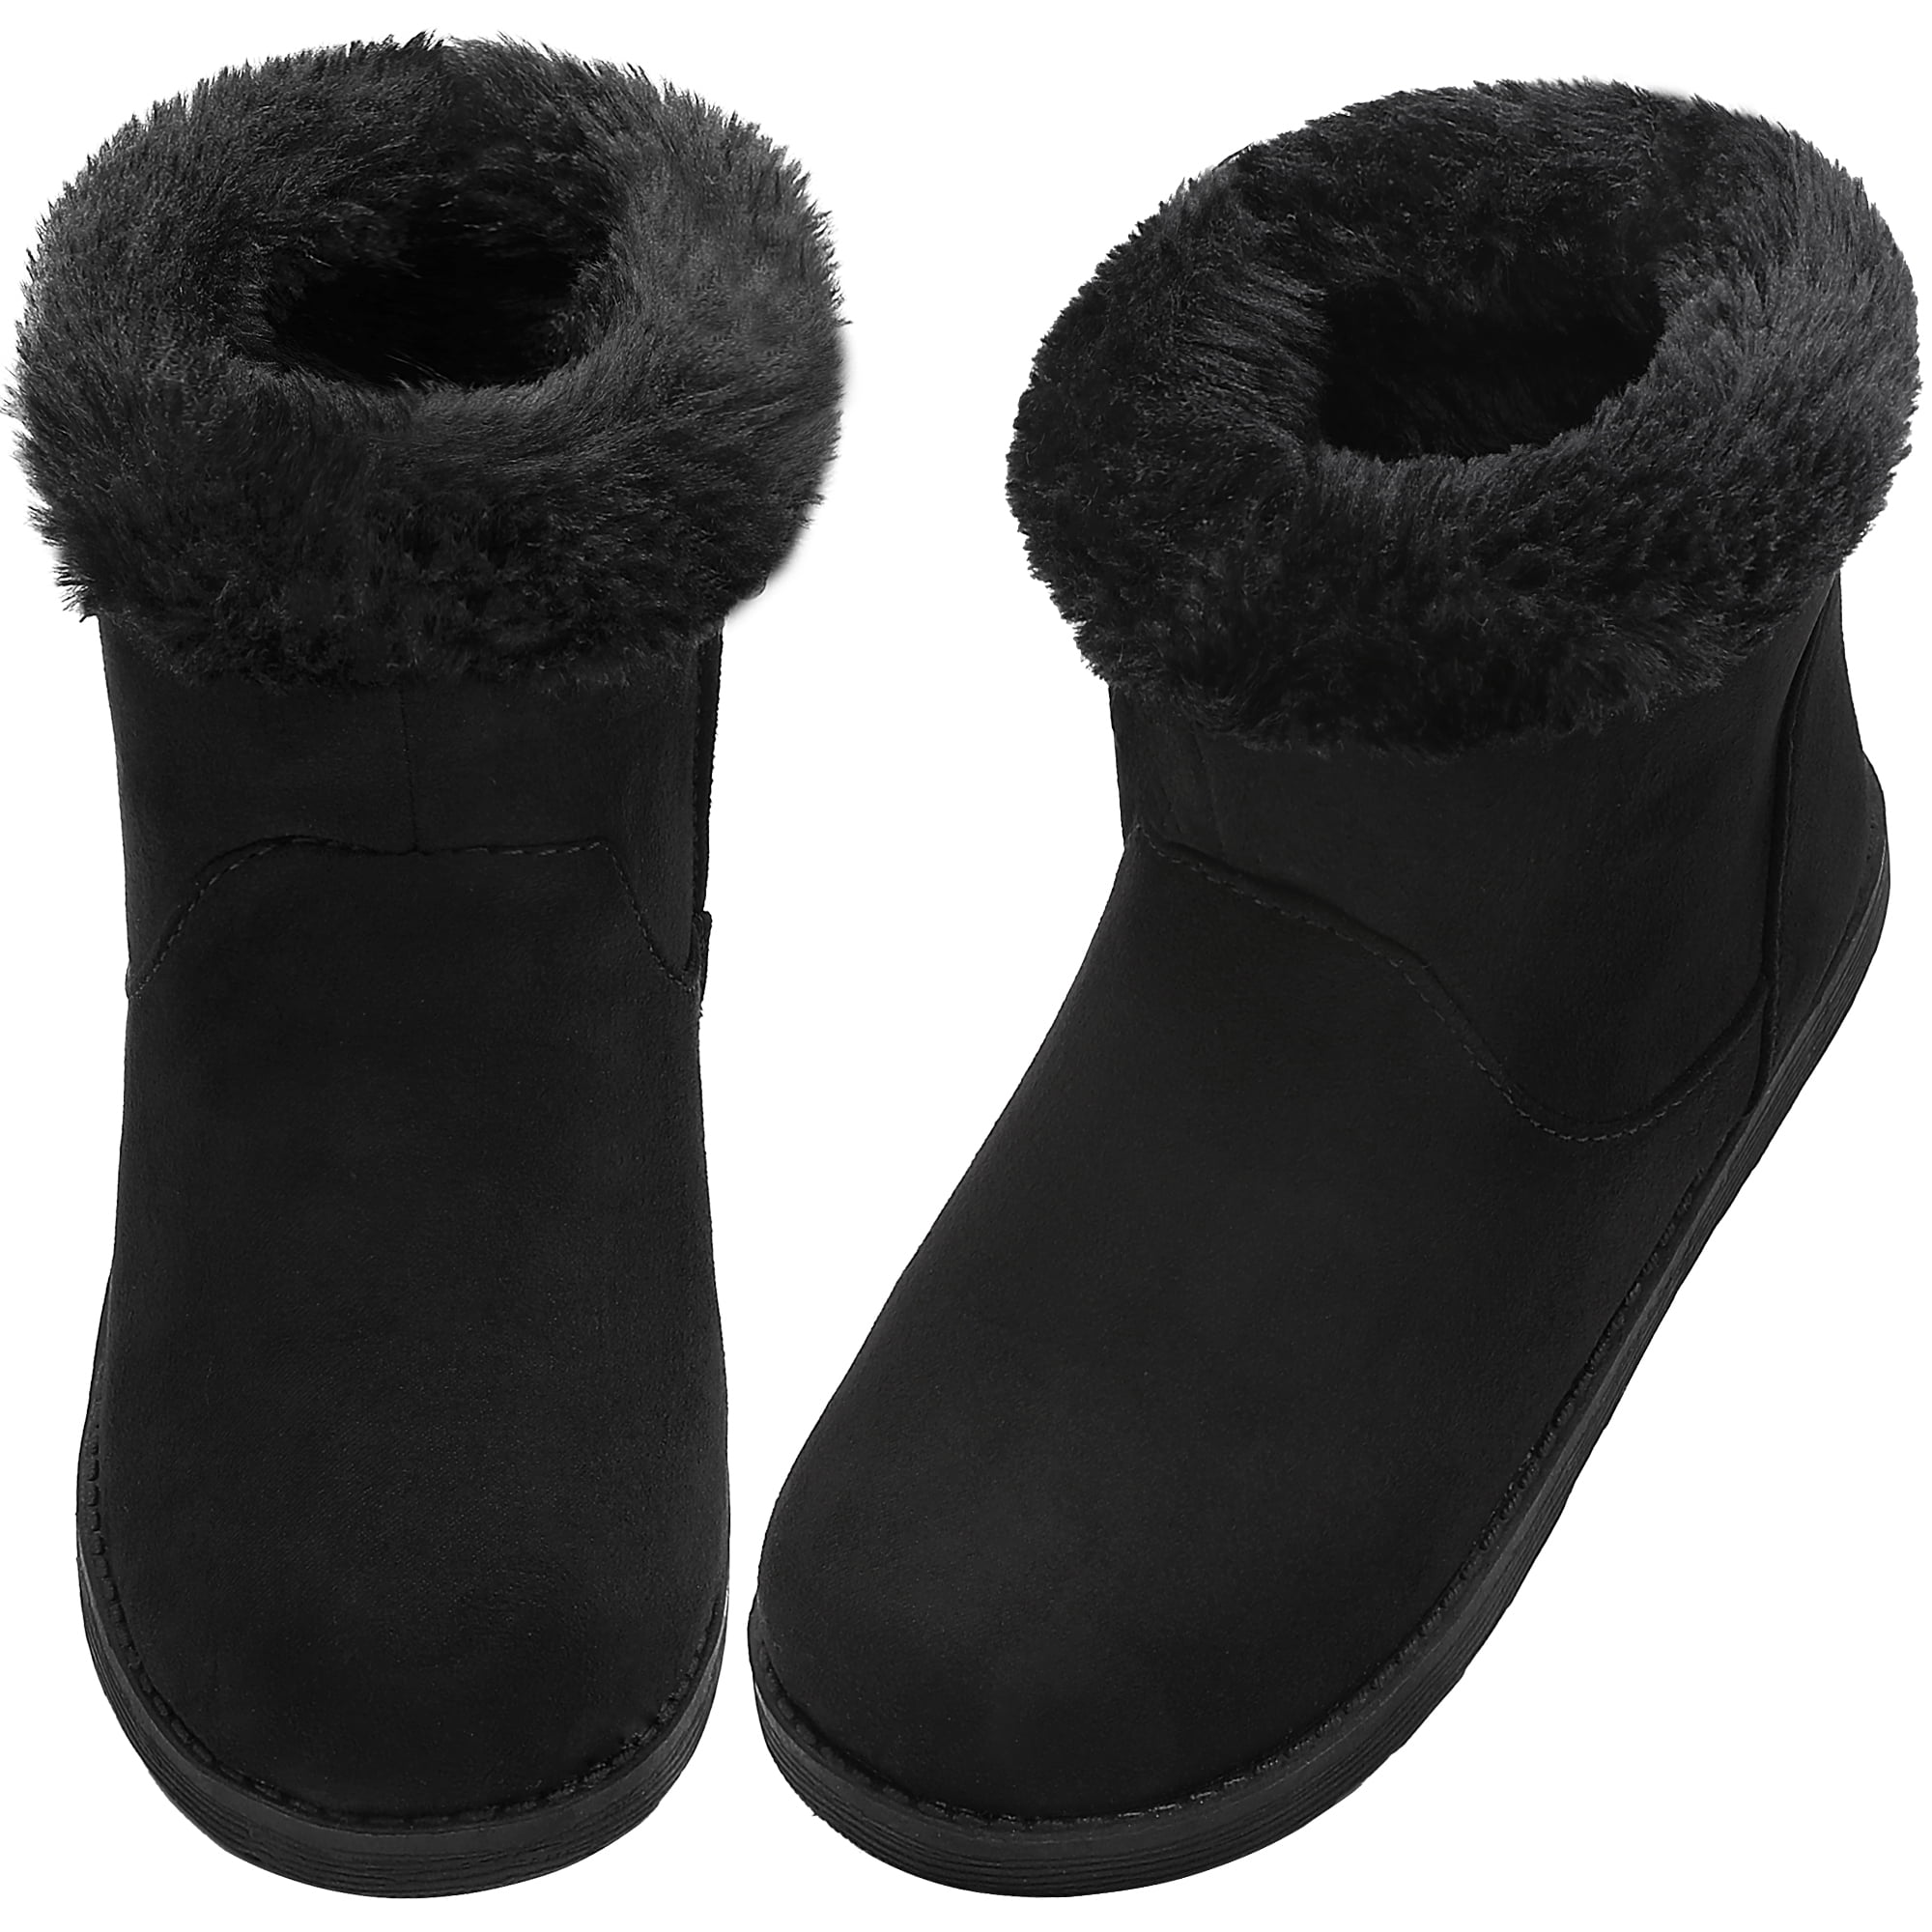 NCCB Girls Snow Boots Fur Lined Low Heels Ankle Boots Slip on Snow ...